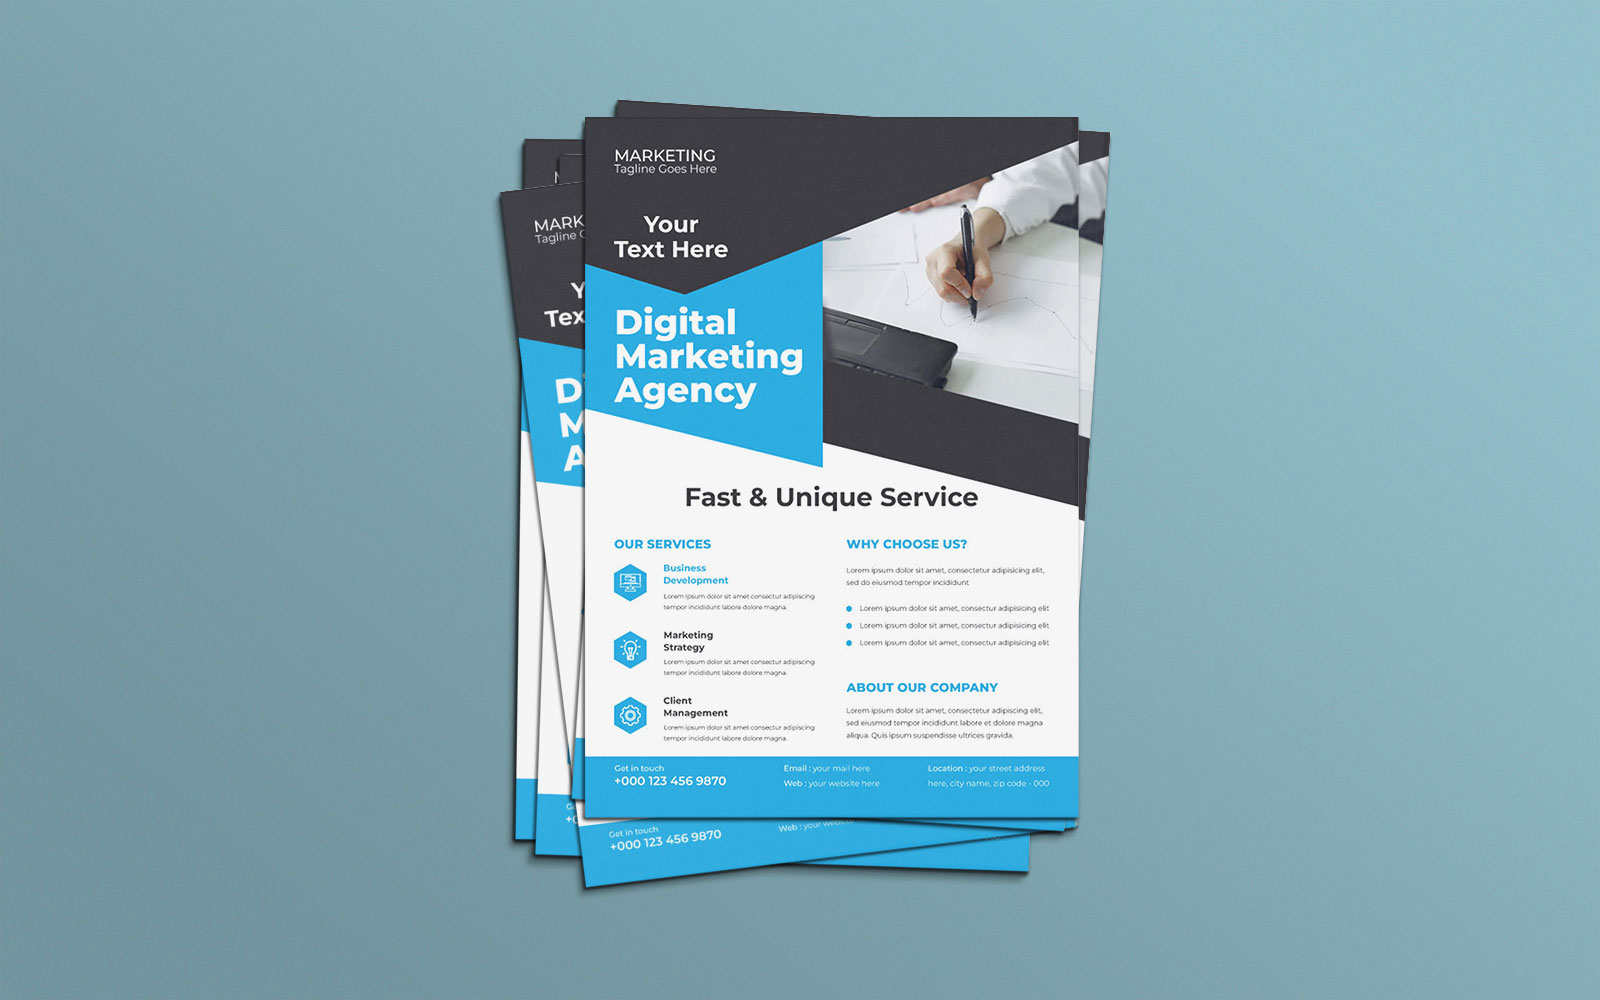 Digital Marketing Agency Legal Services Promotion Flyer Vector Layout